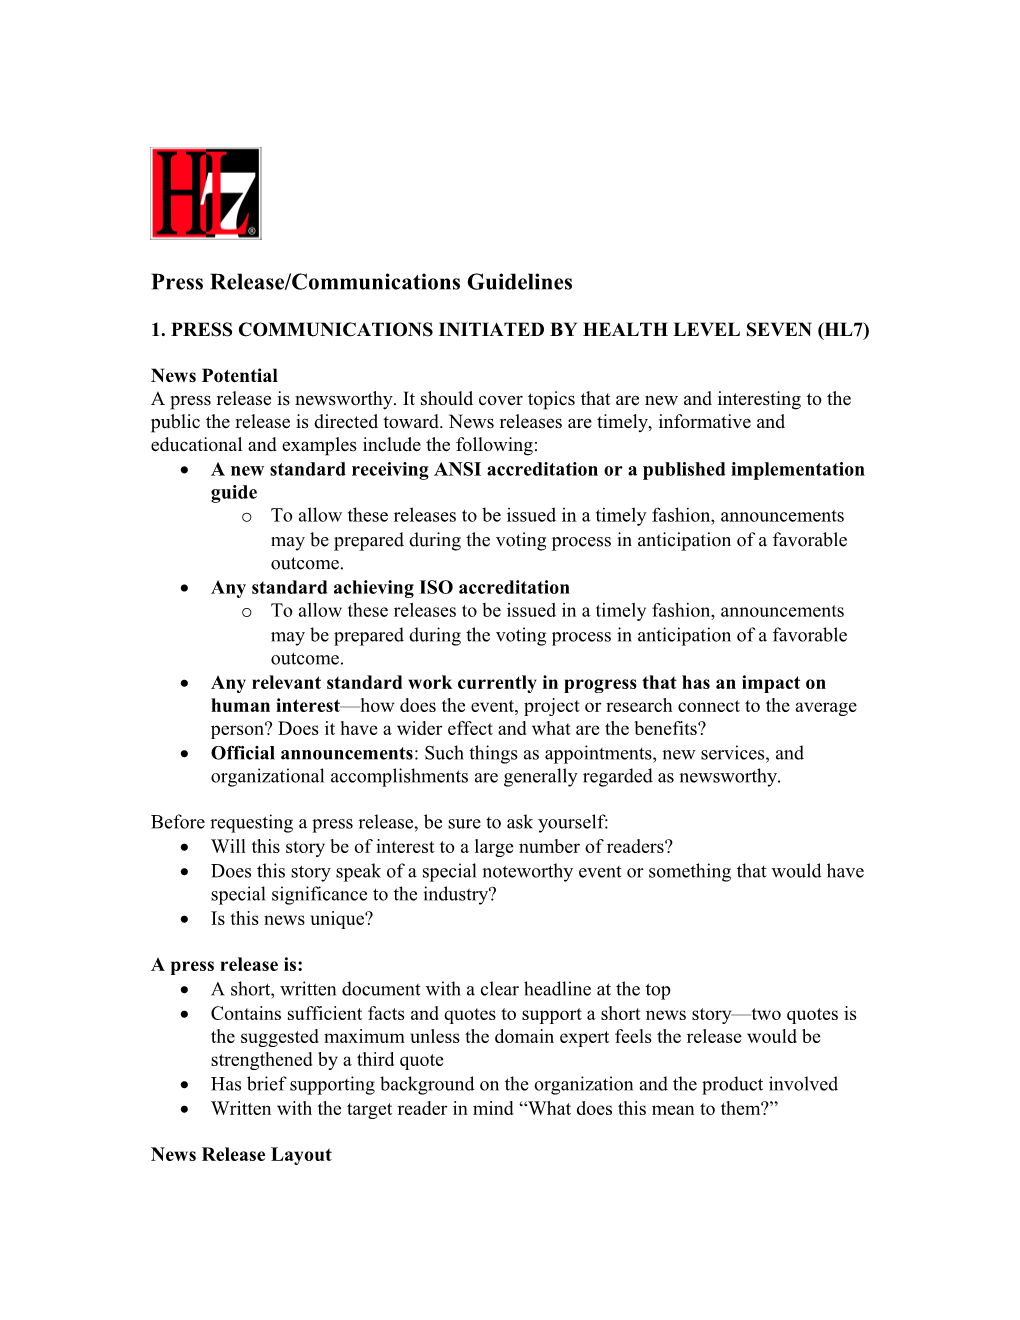 HL7 Press Release Guidelines for Tcs and Sigs